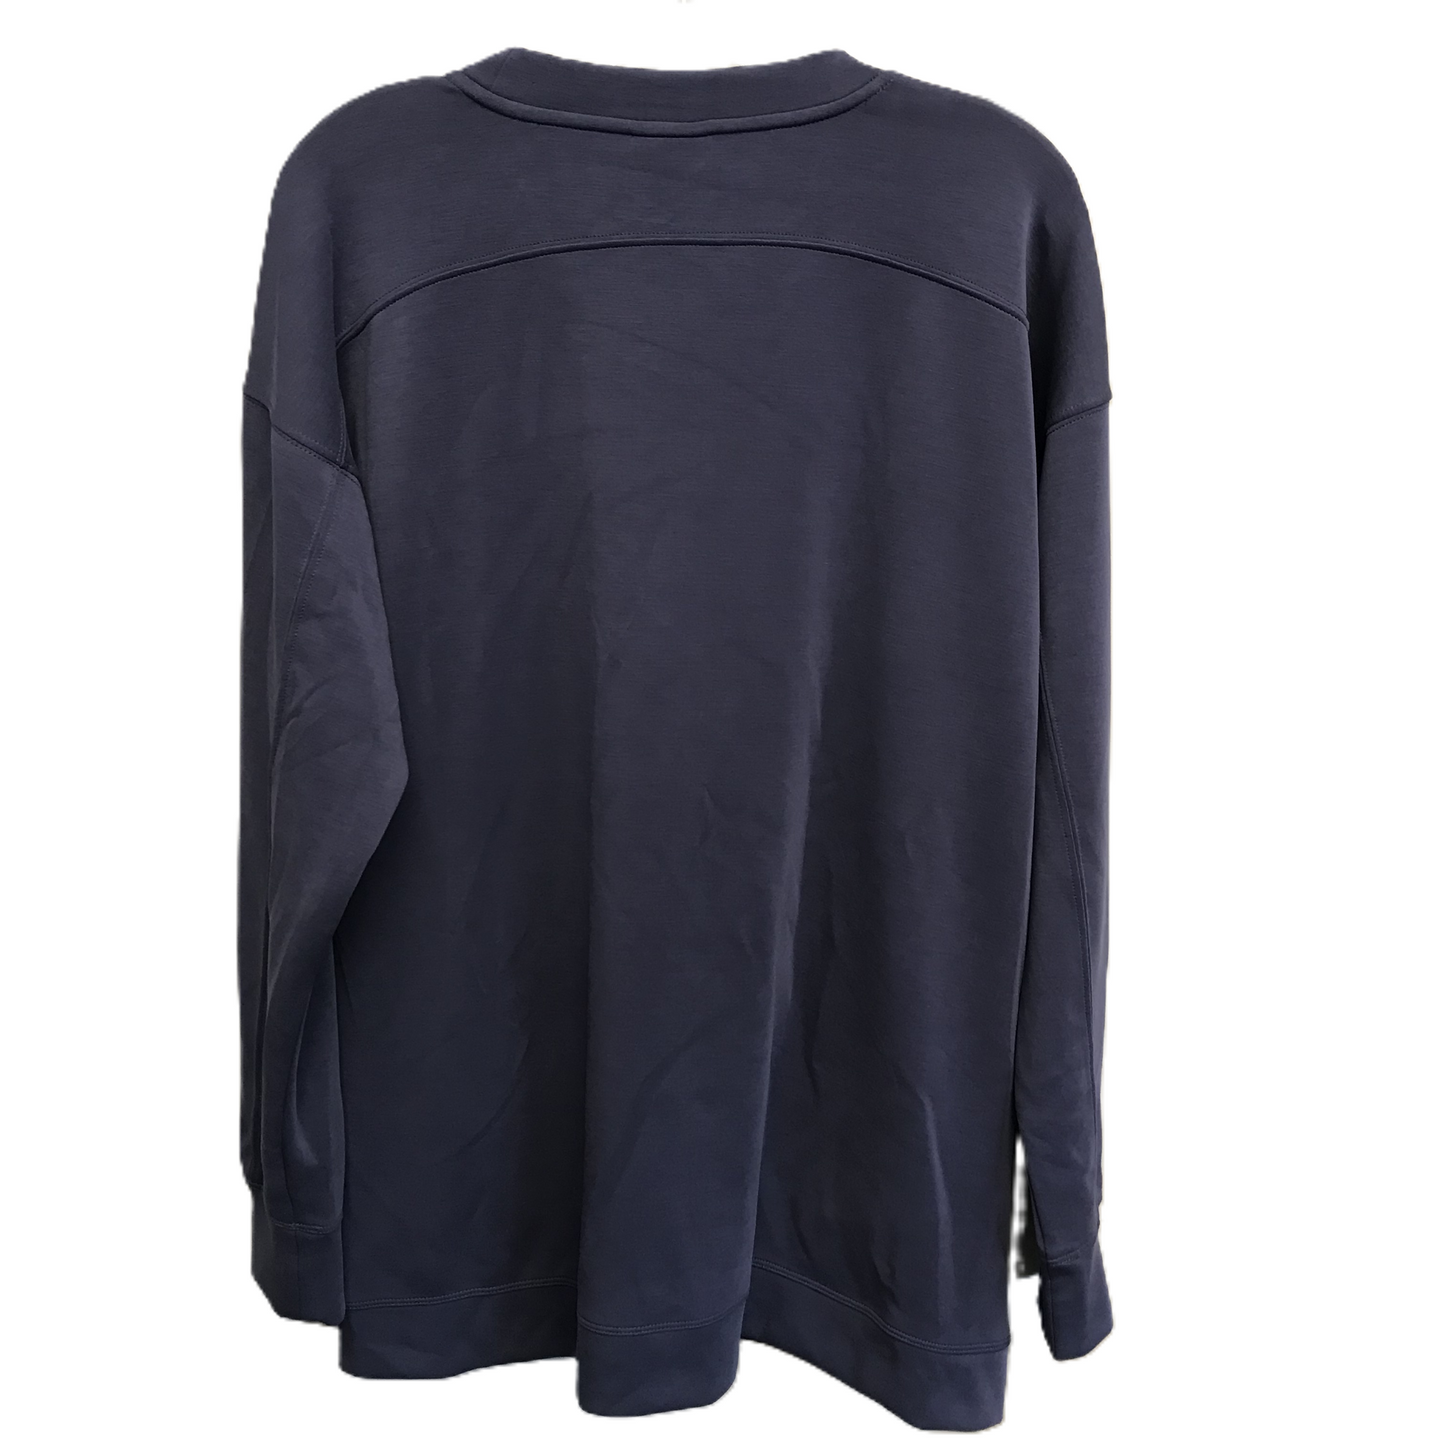 Blue Athletic Top Long Sleeve Crewneck By Sage, Size: L